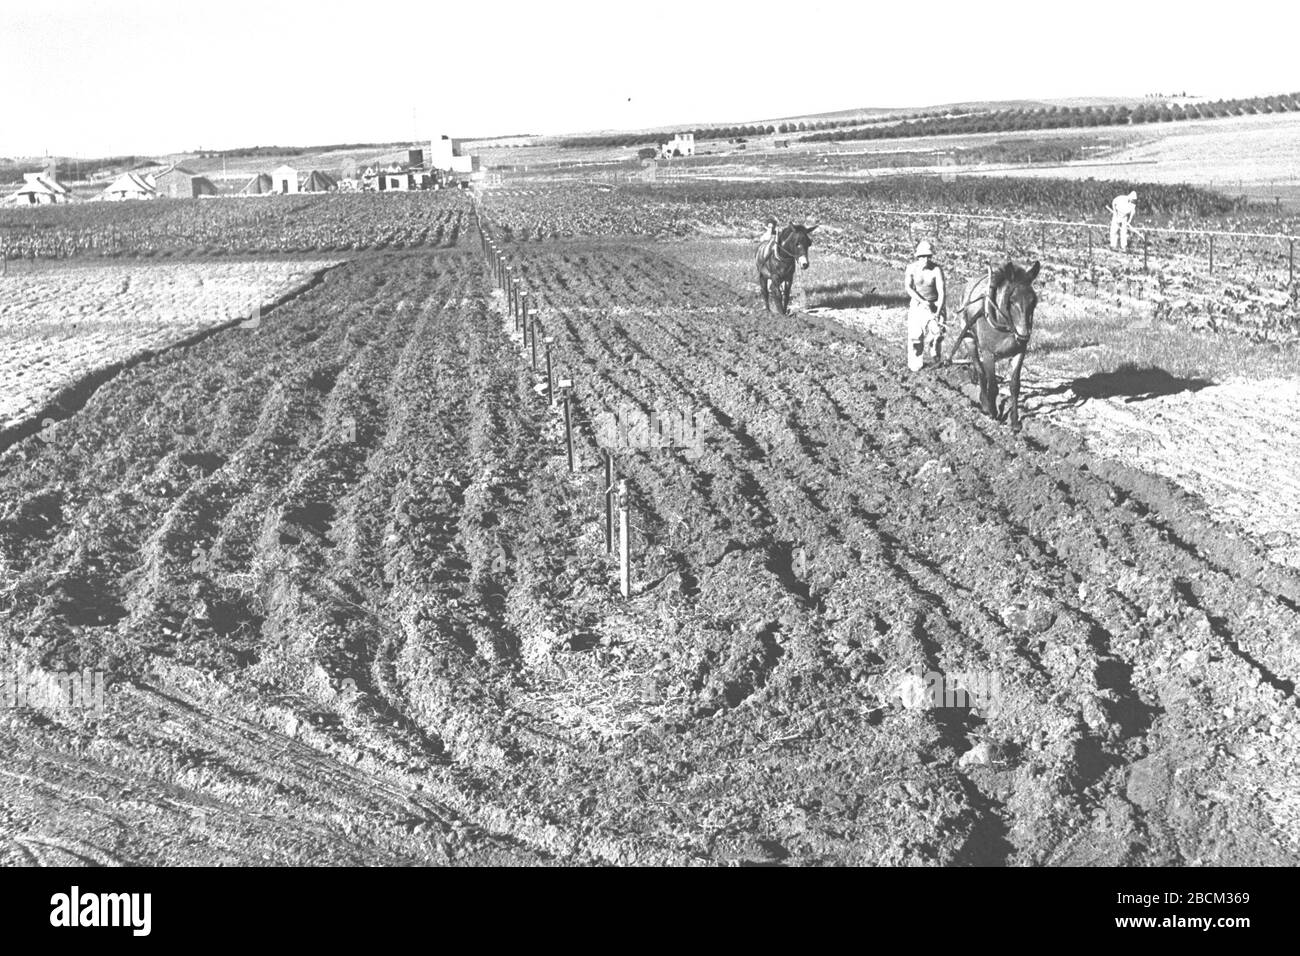 English Settlers Ploughing A Field At Moshav Batzra O Ss U E O U I E I O U E C I I C U U I C E E I E C I U 05 08 1946 This Is Available From National Photo Collection Of Israel Photography Dept